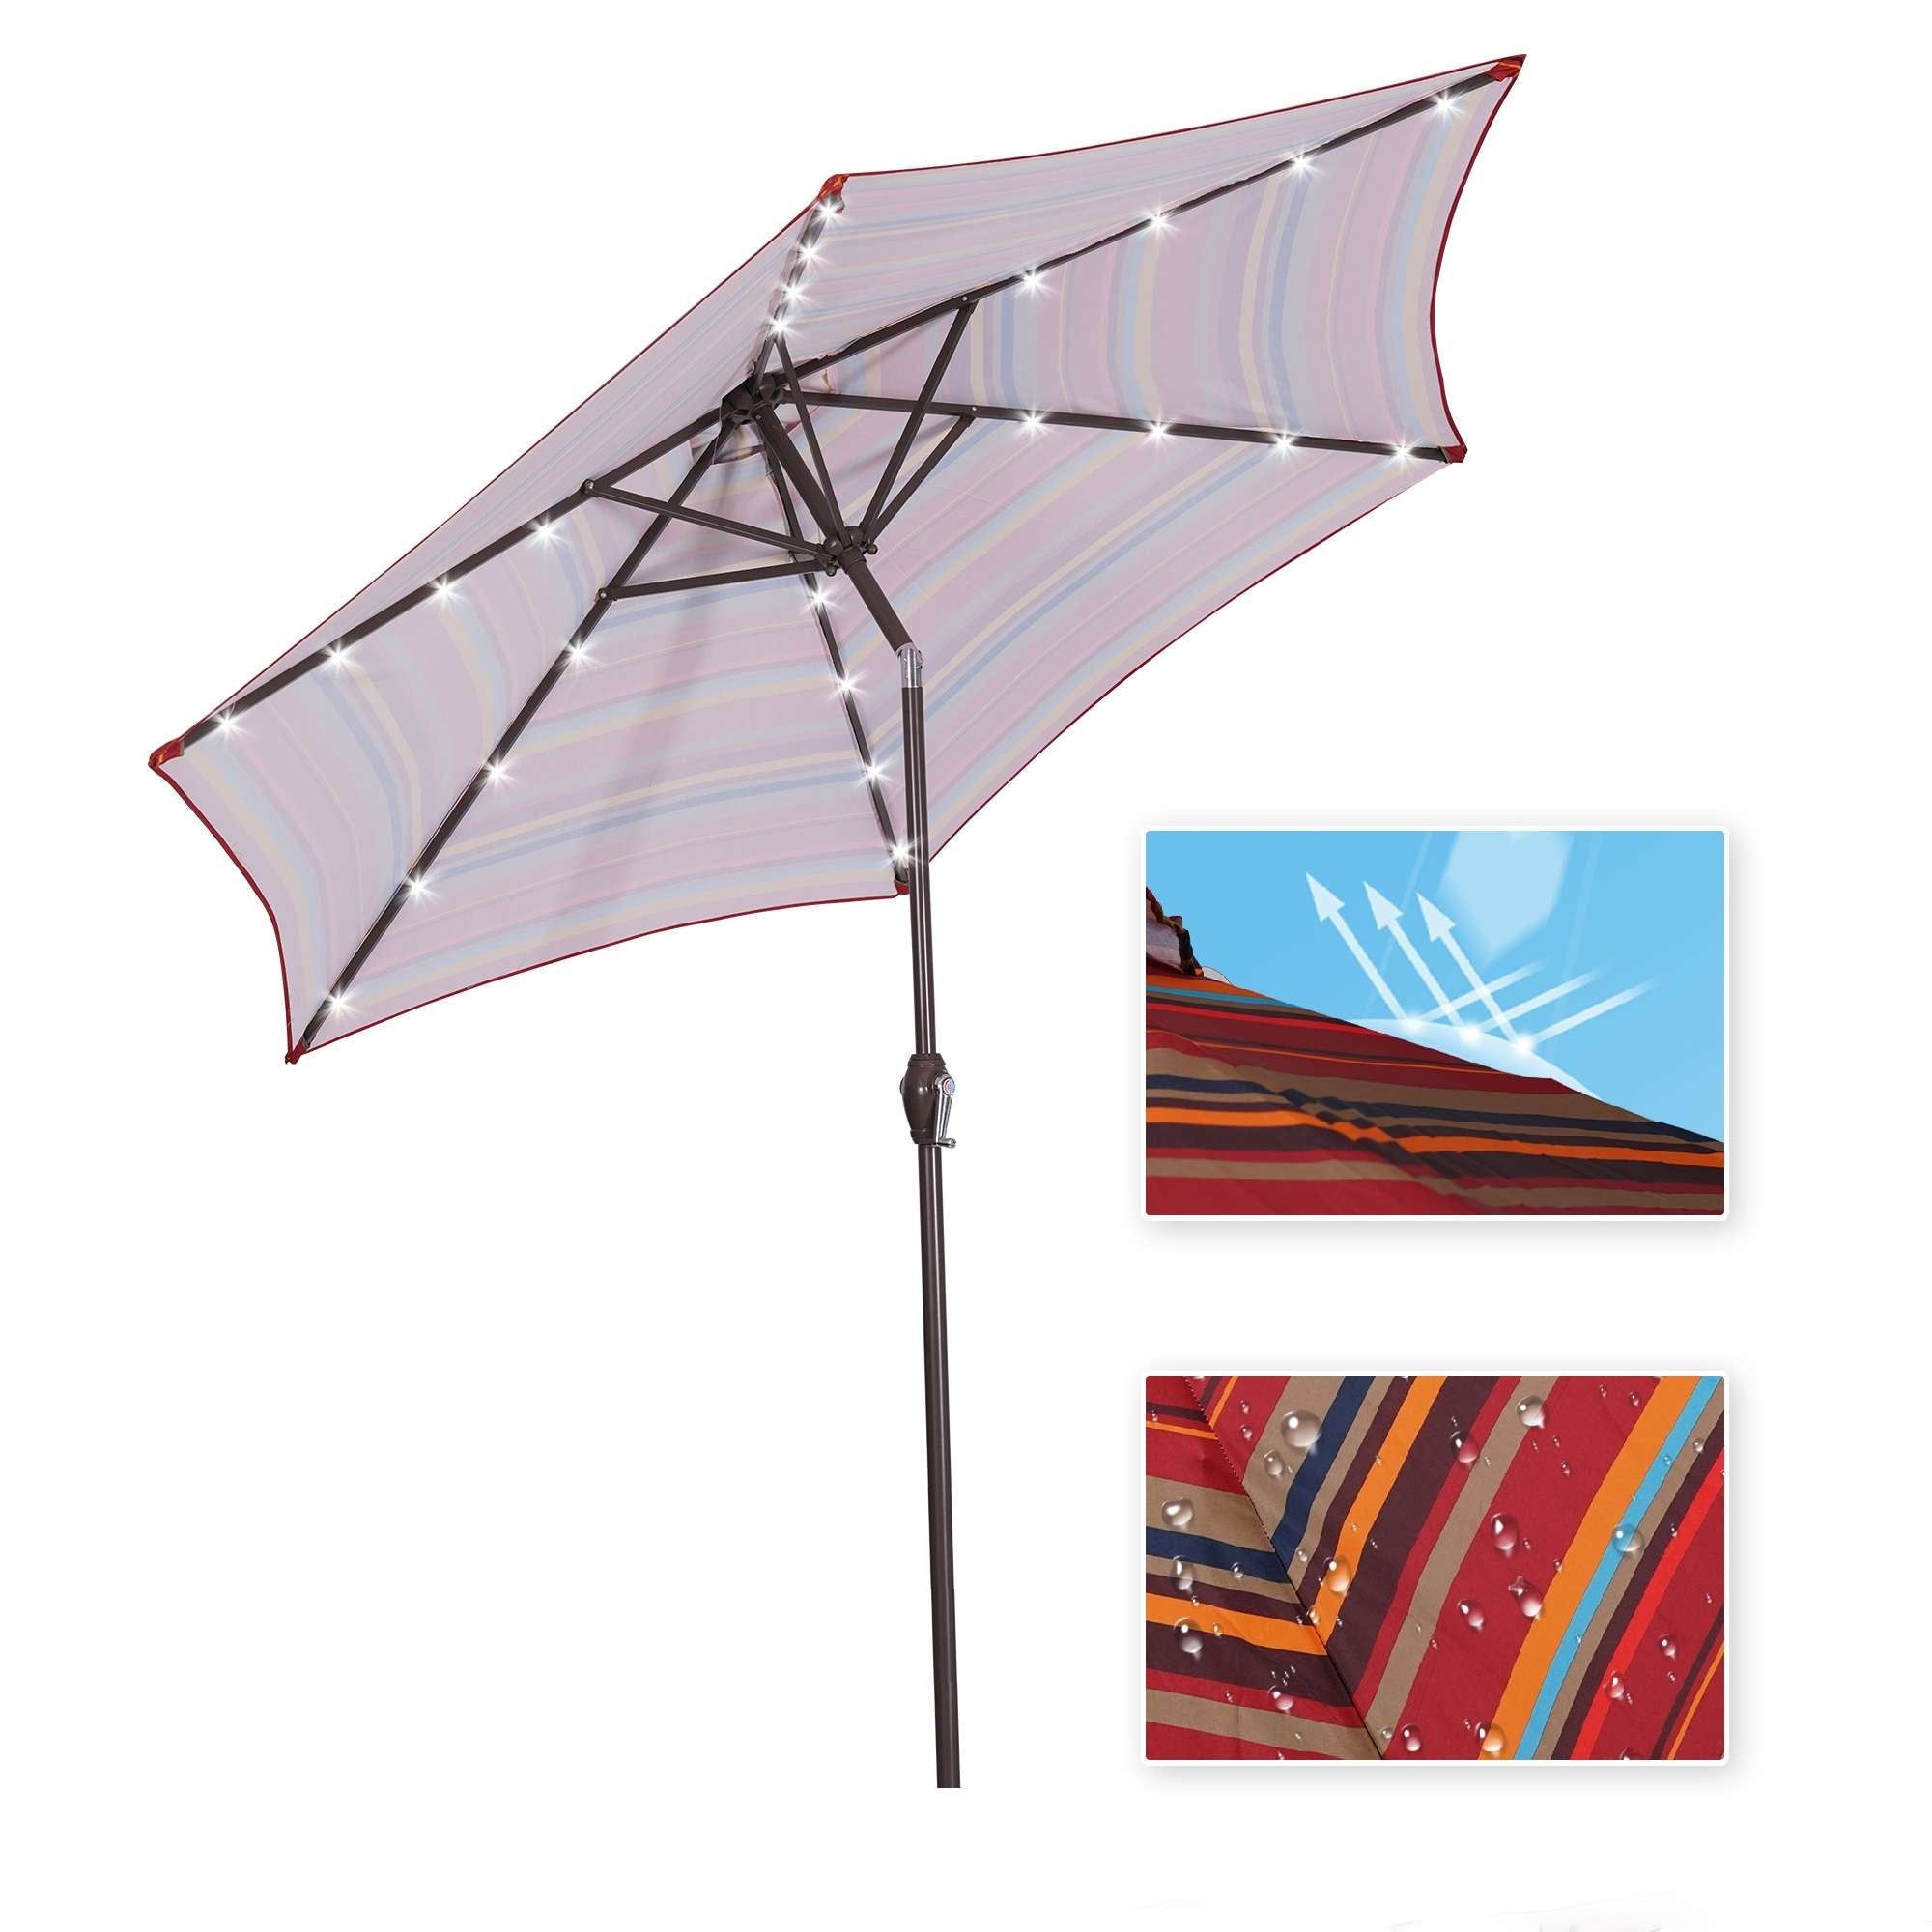 [KGORGE Plus]8.7 Ft Outdoor Patio Market Table Umbrella with Push Button Tilt and Crank With 24 LED Lights[Umbrella Base is not Included]